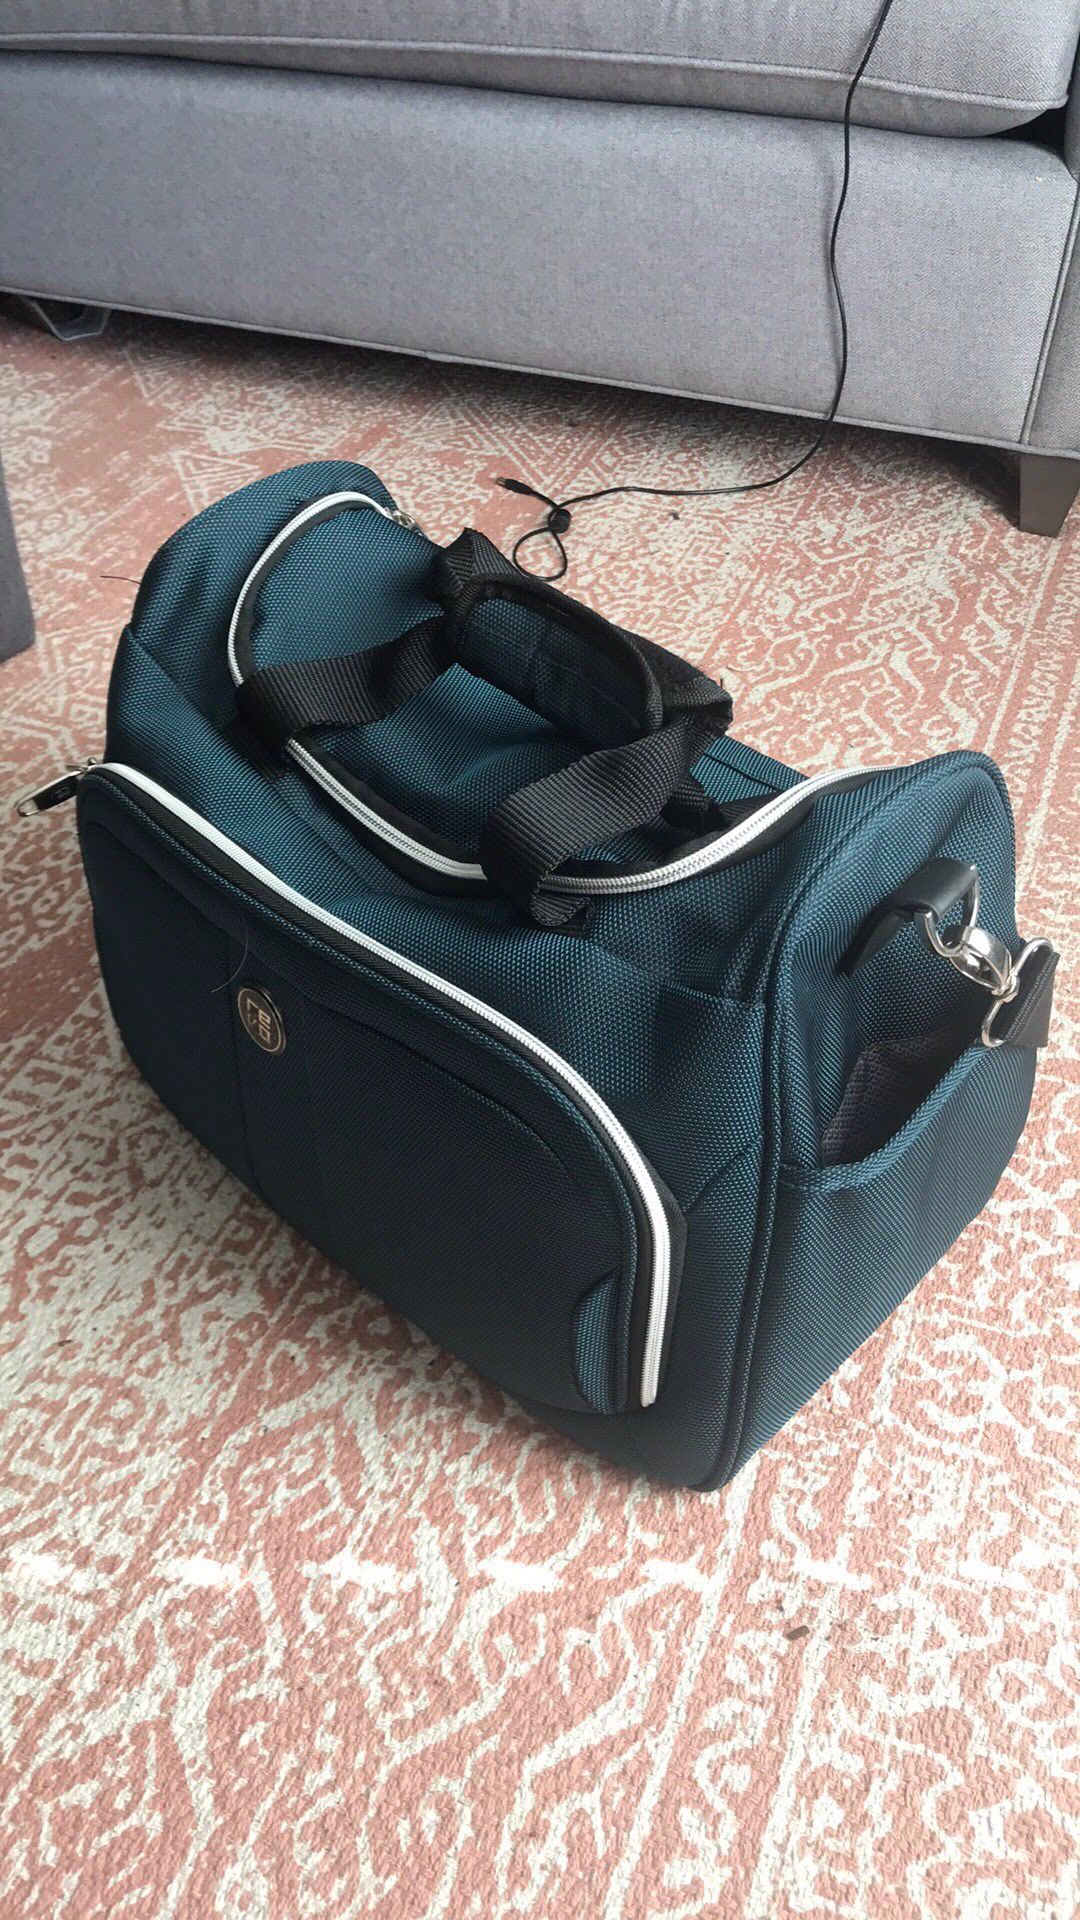 Carry on suitcase from Macy’s